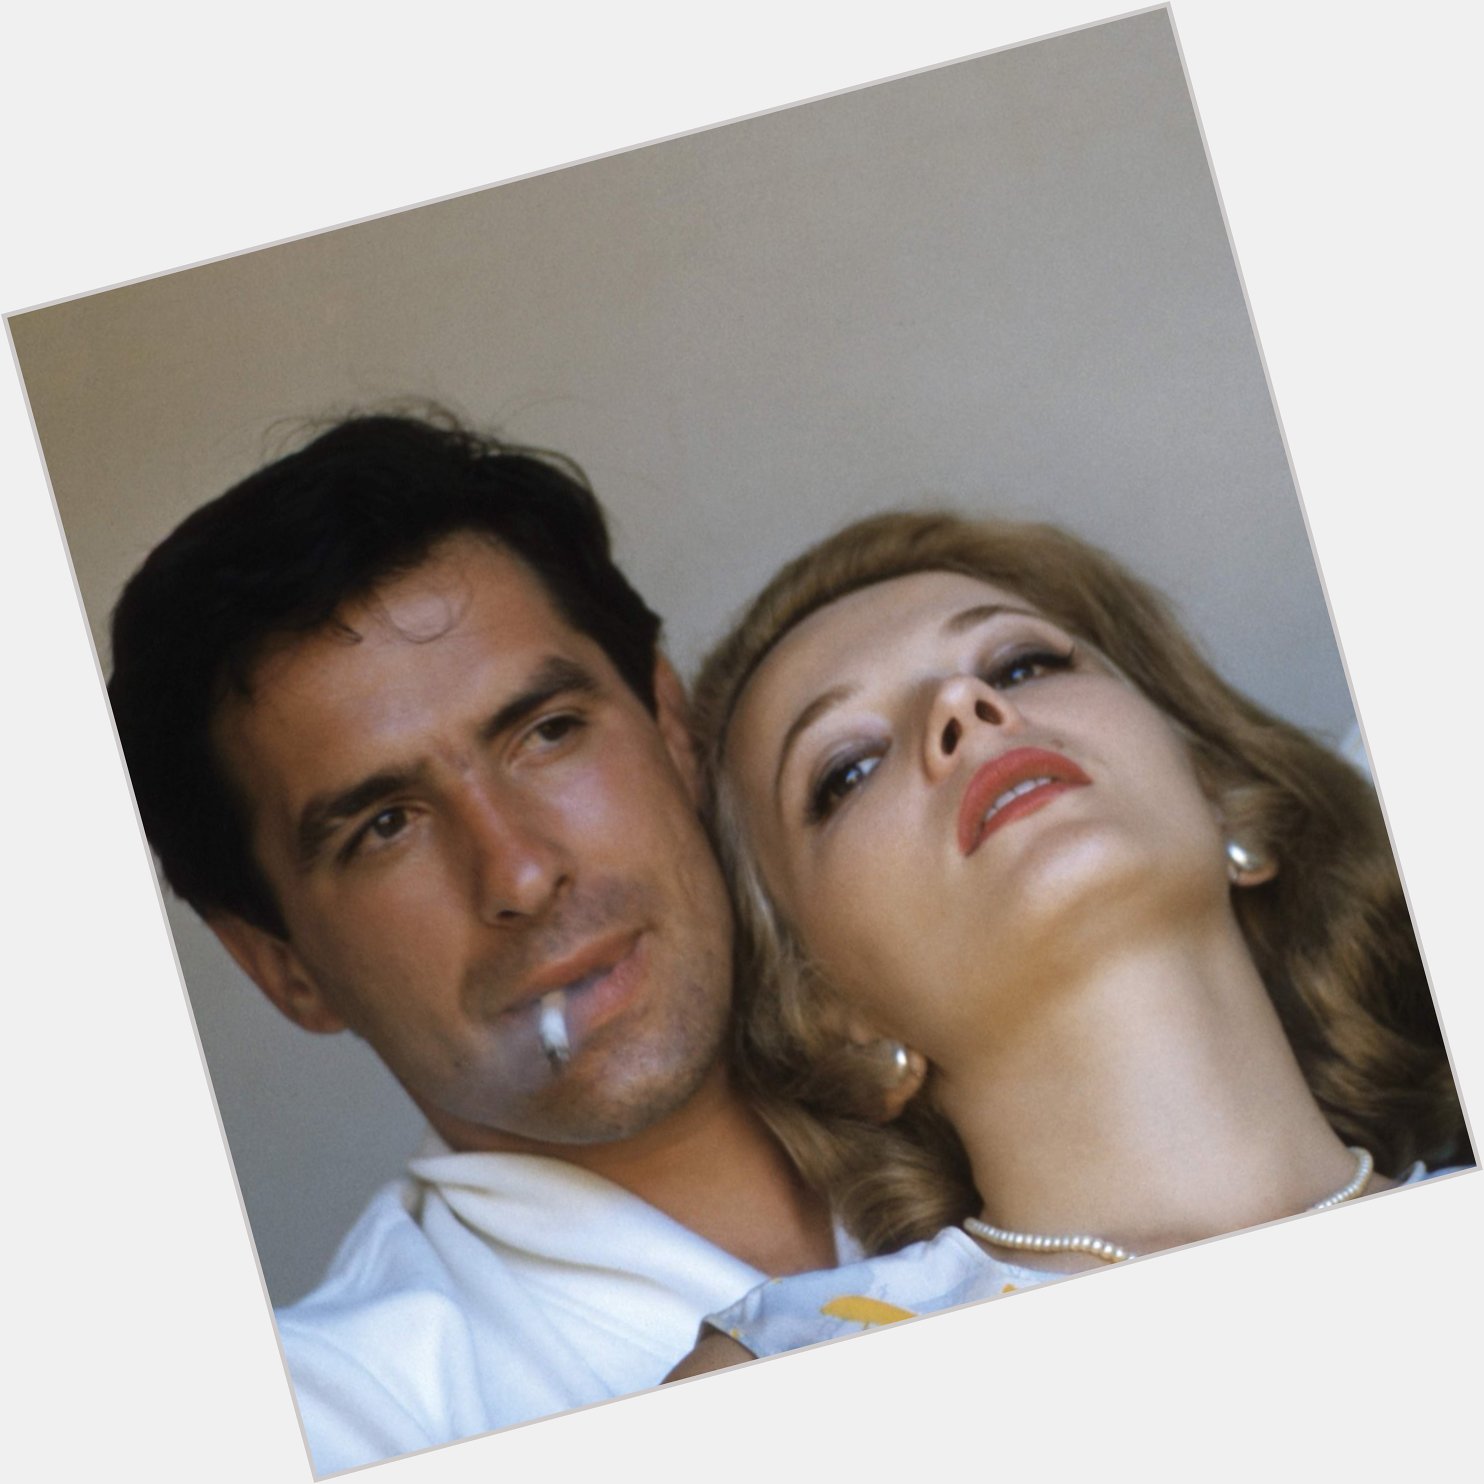 Happy 92nd birthday to the incomparable Gena Rowlands, pictured here with her husband John Cassavetes 